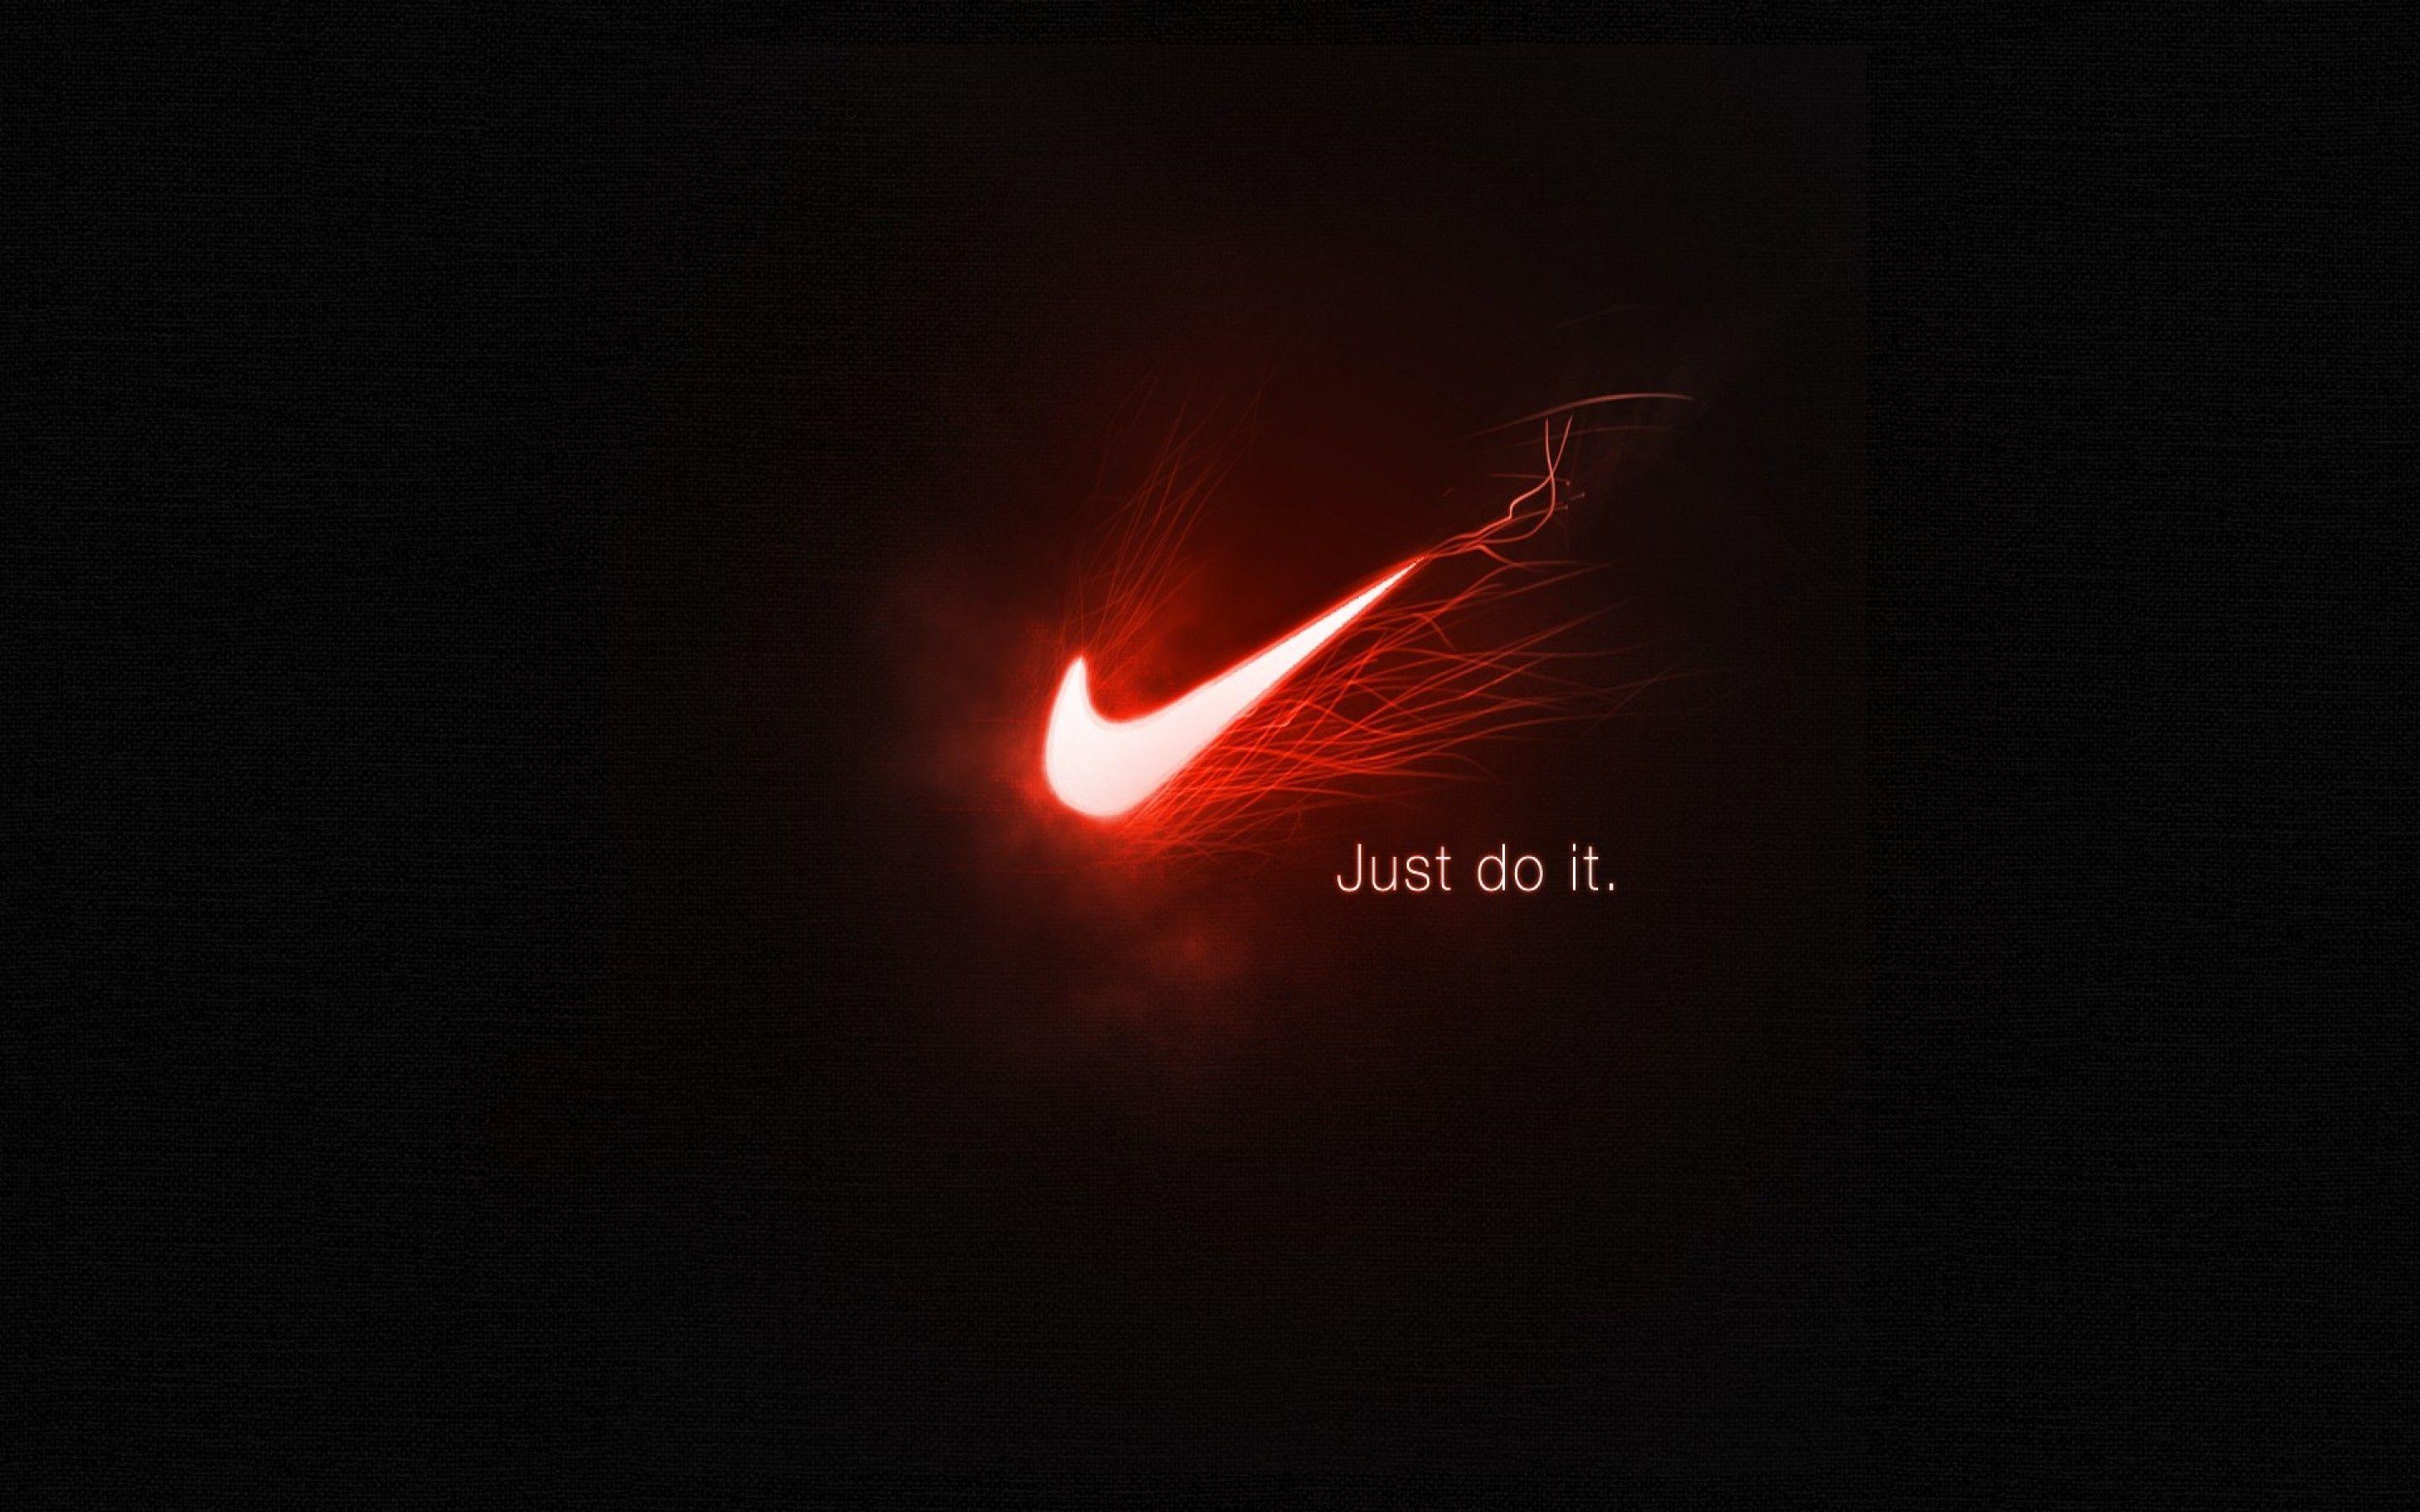 nike logo red and black